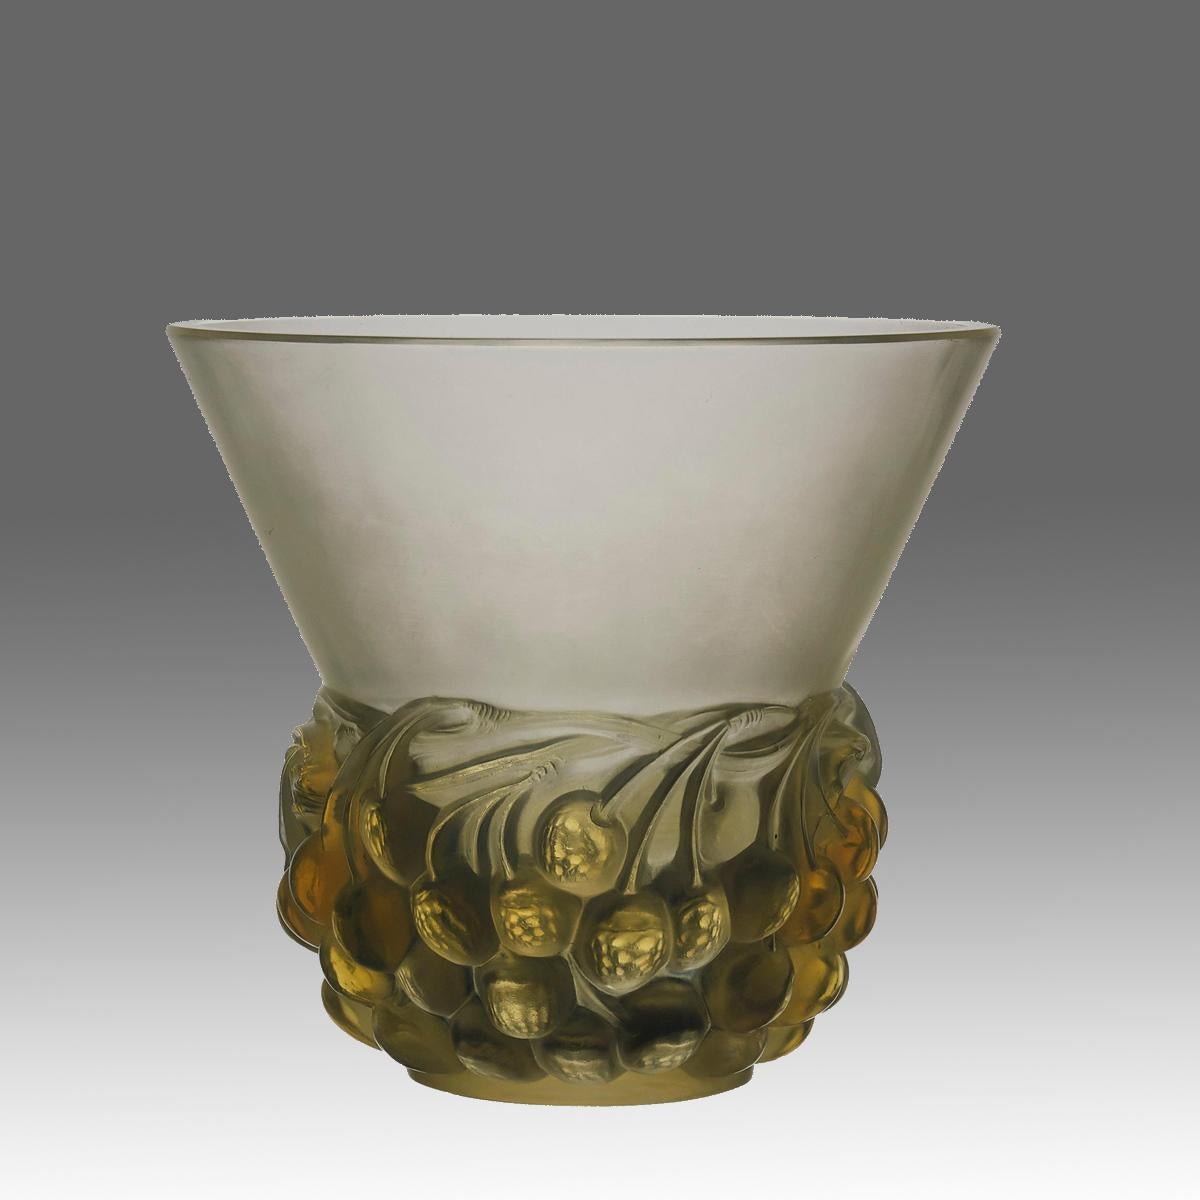 An attractive René Lalique original Art Deco glass vase decorated with raised fruiting berries around the full circumference of the vase, exhibiting an excellent mix of frosted and opalescent glass with fine hand finished detail, signed R Lalique